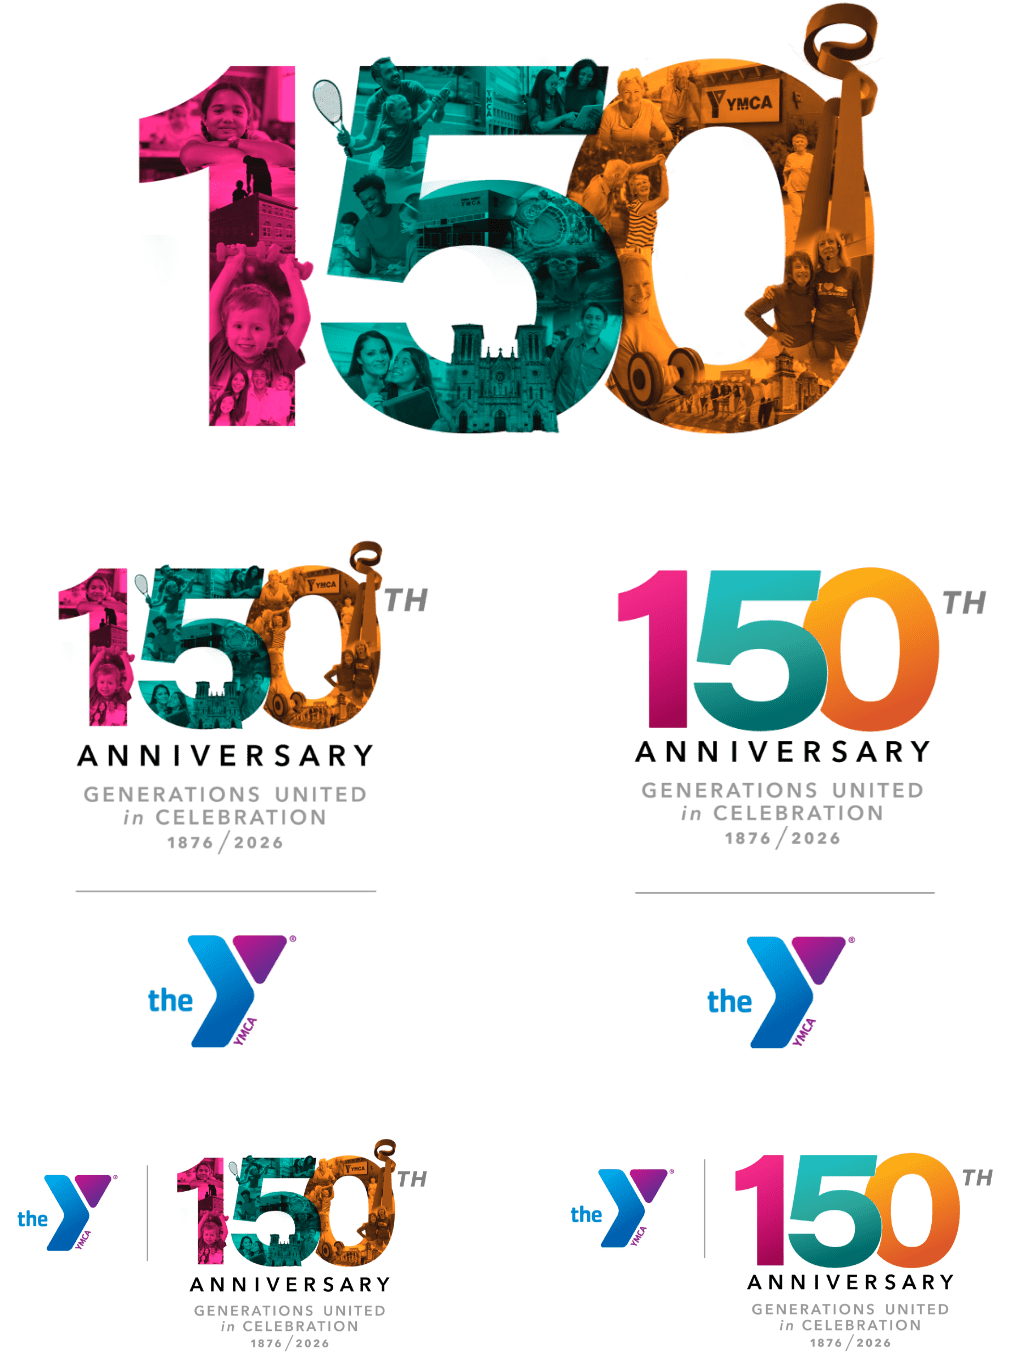 Artwork of the 150th element of the 150th Anniversary logo with the vertical and horizontal orientations of each full logo: the collage version to the left and the gradation numerals version to the right (seen only on mobile)